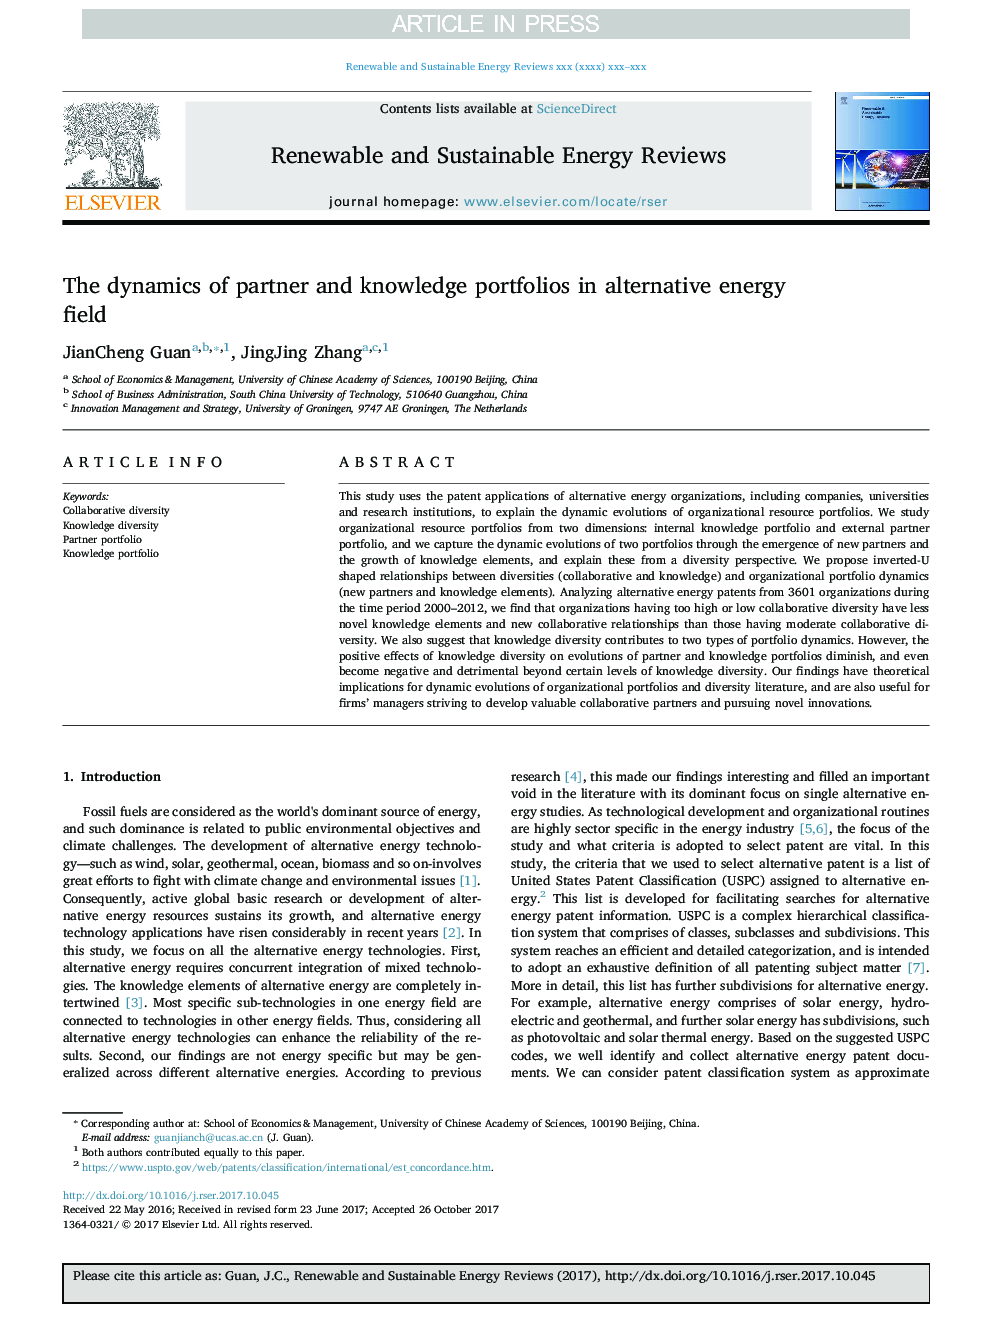 The dynamics of partner and knowledge portfolios in alternative energy field